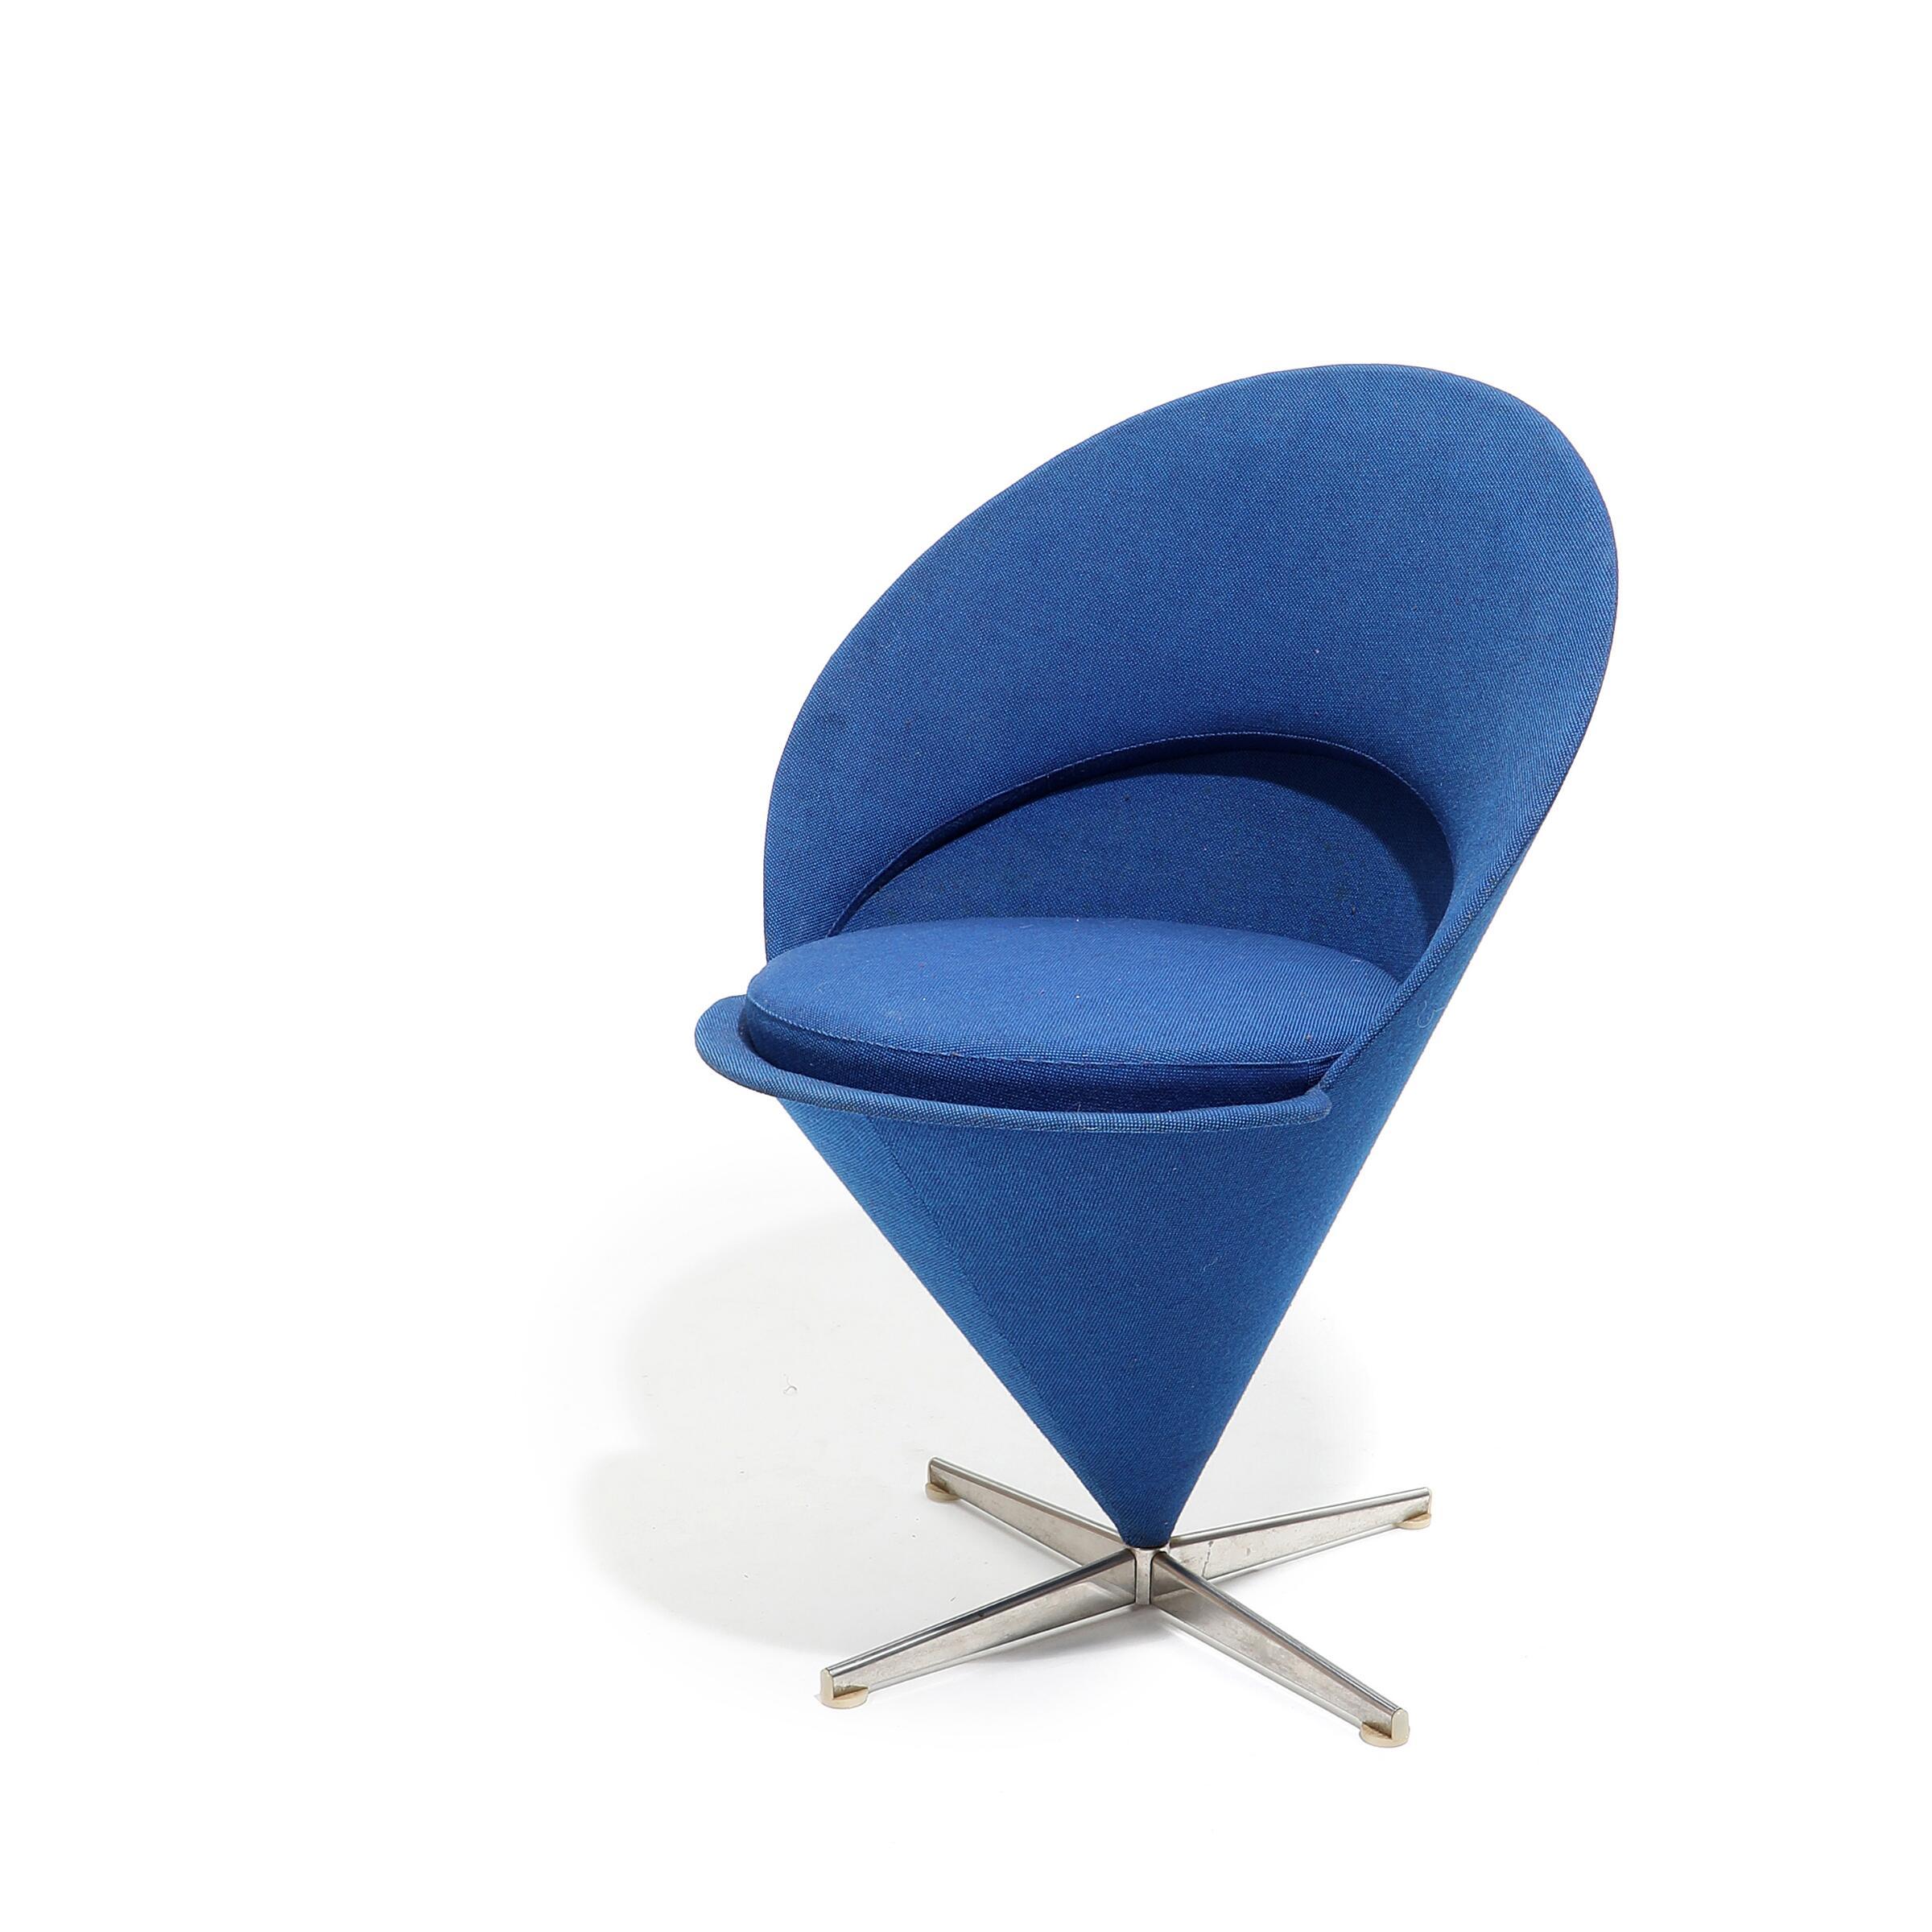 Early Edition Verner Panton Blue Cone Chair Made by Plus Line, 1958 In Fair Condition For Sale In Vejle Øst, DK